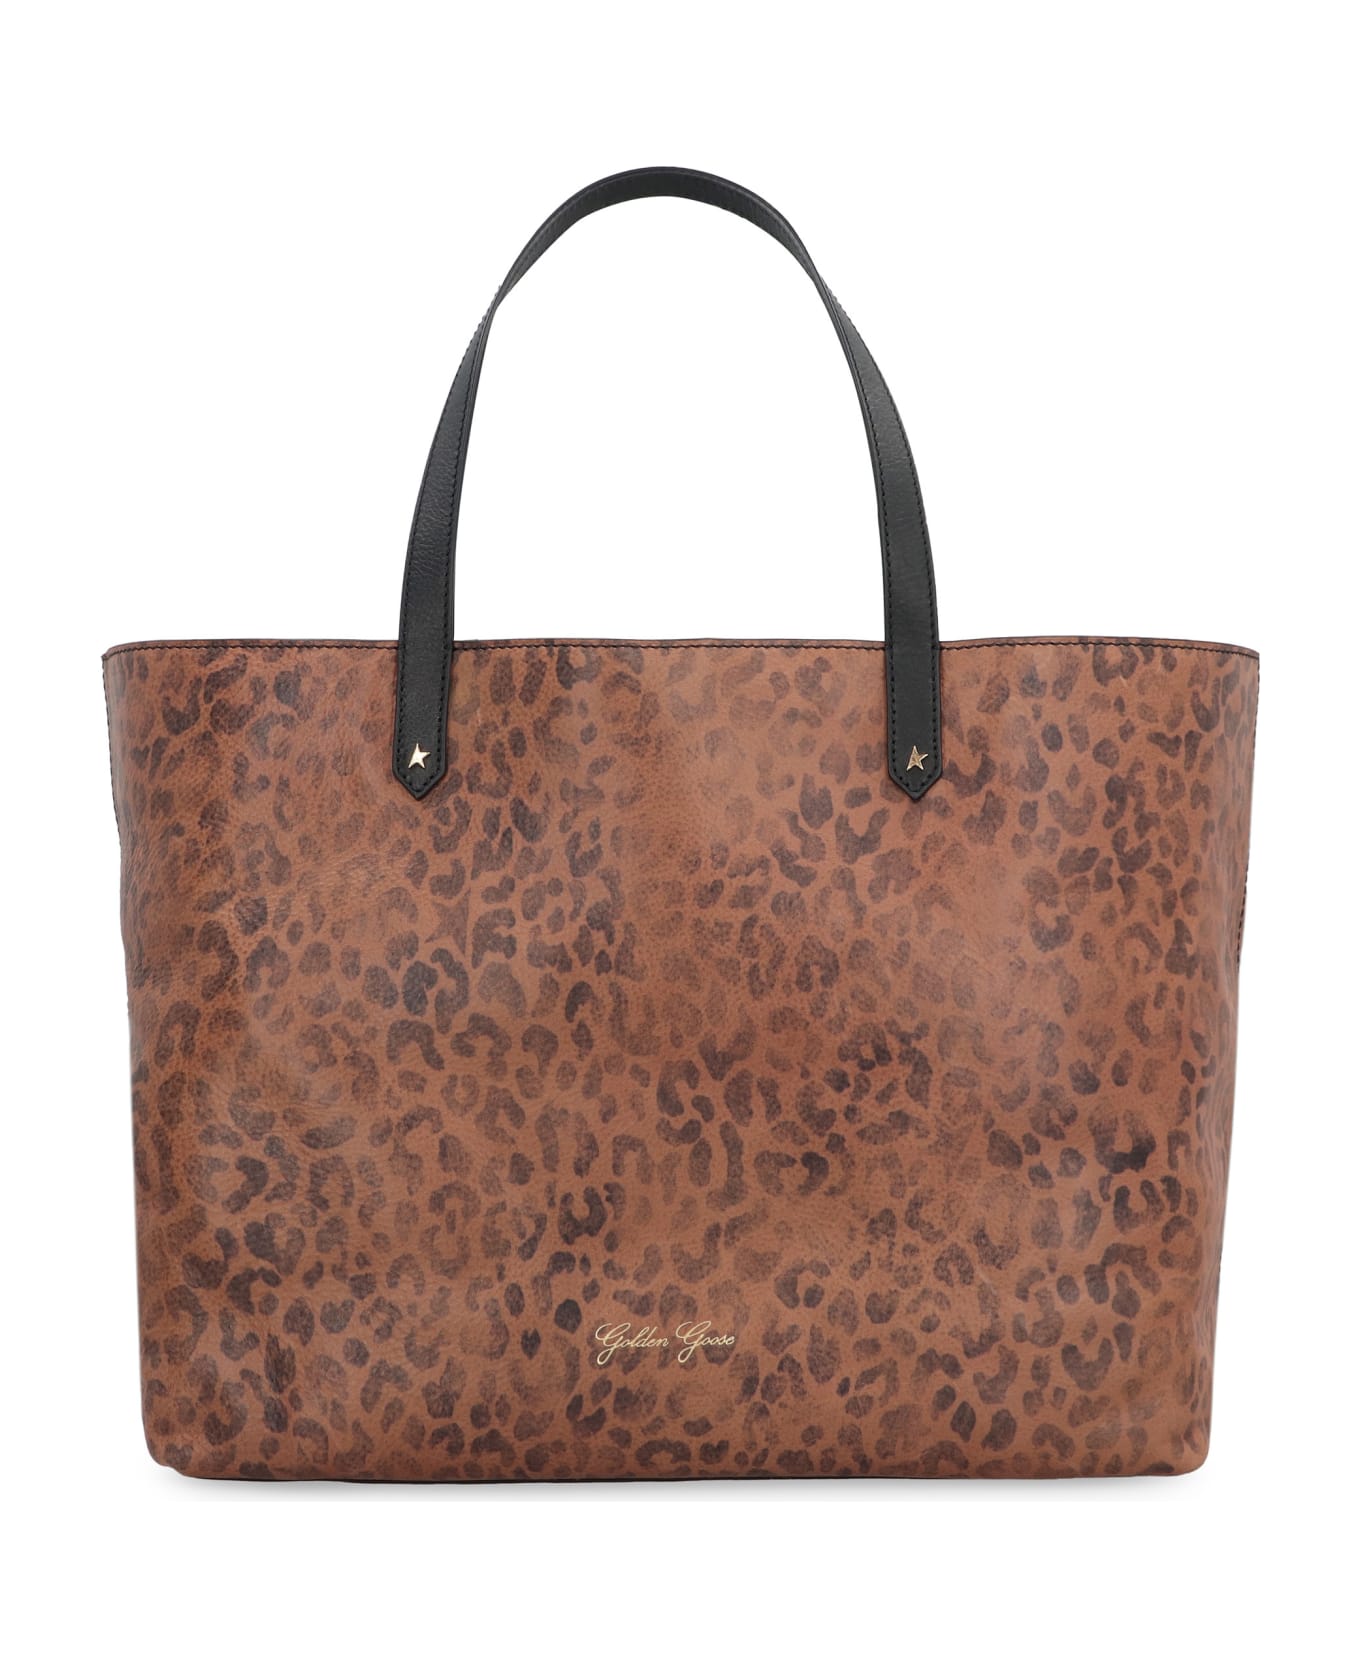 Golden Goose Pasadena Leather Tote - Animalier トートバッグ